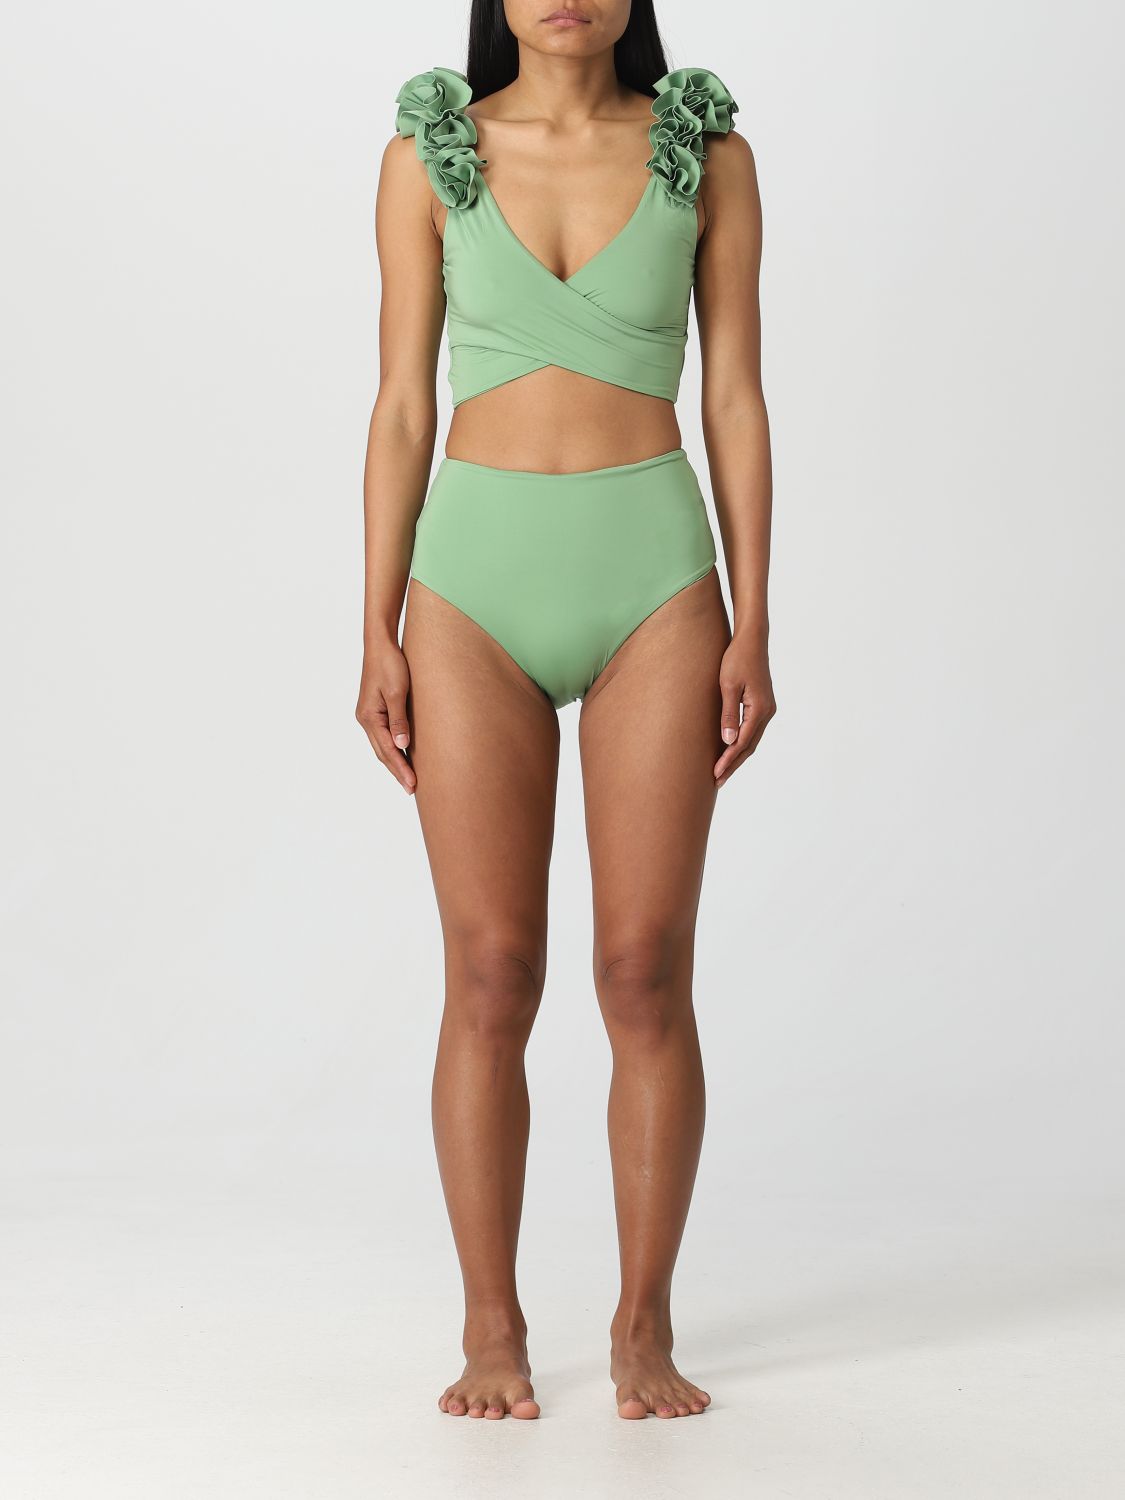 Maygel Coronel Swimsuit  Woman Colour Green